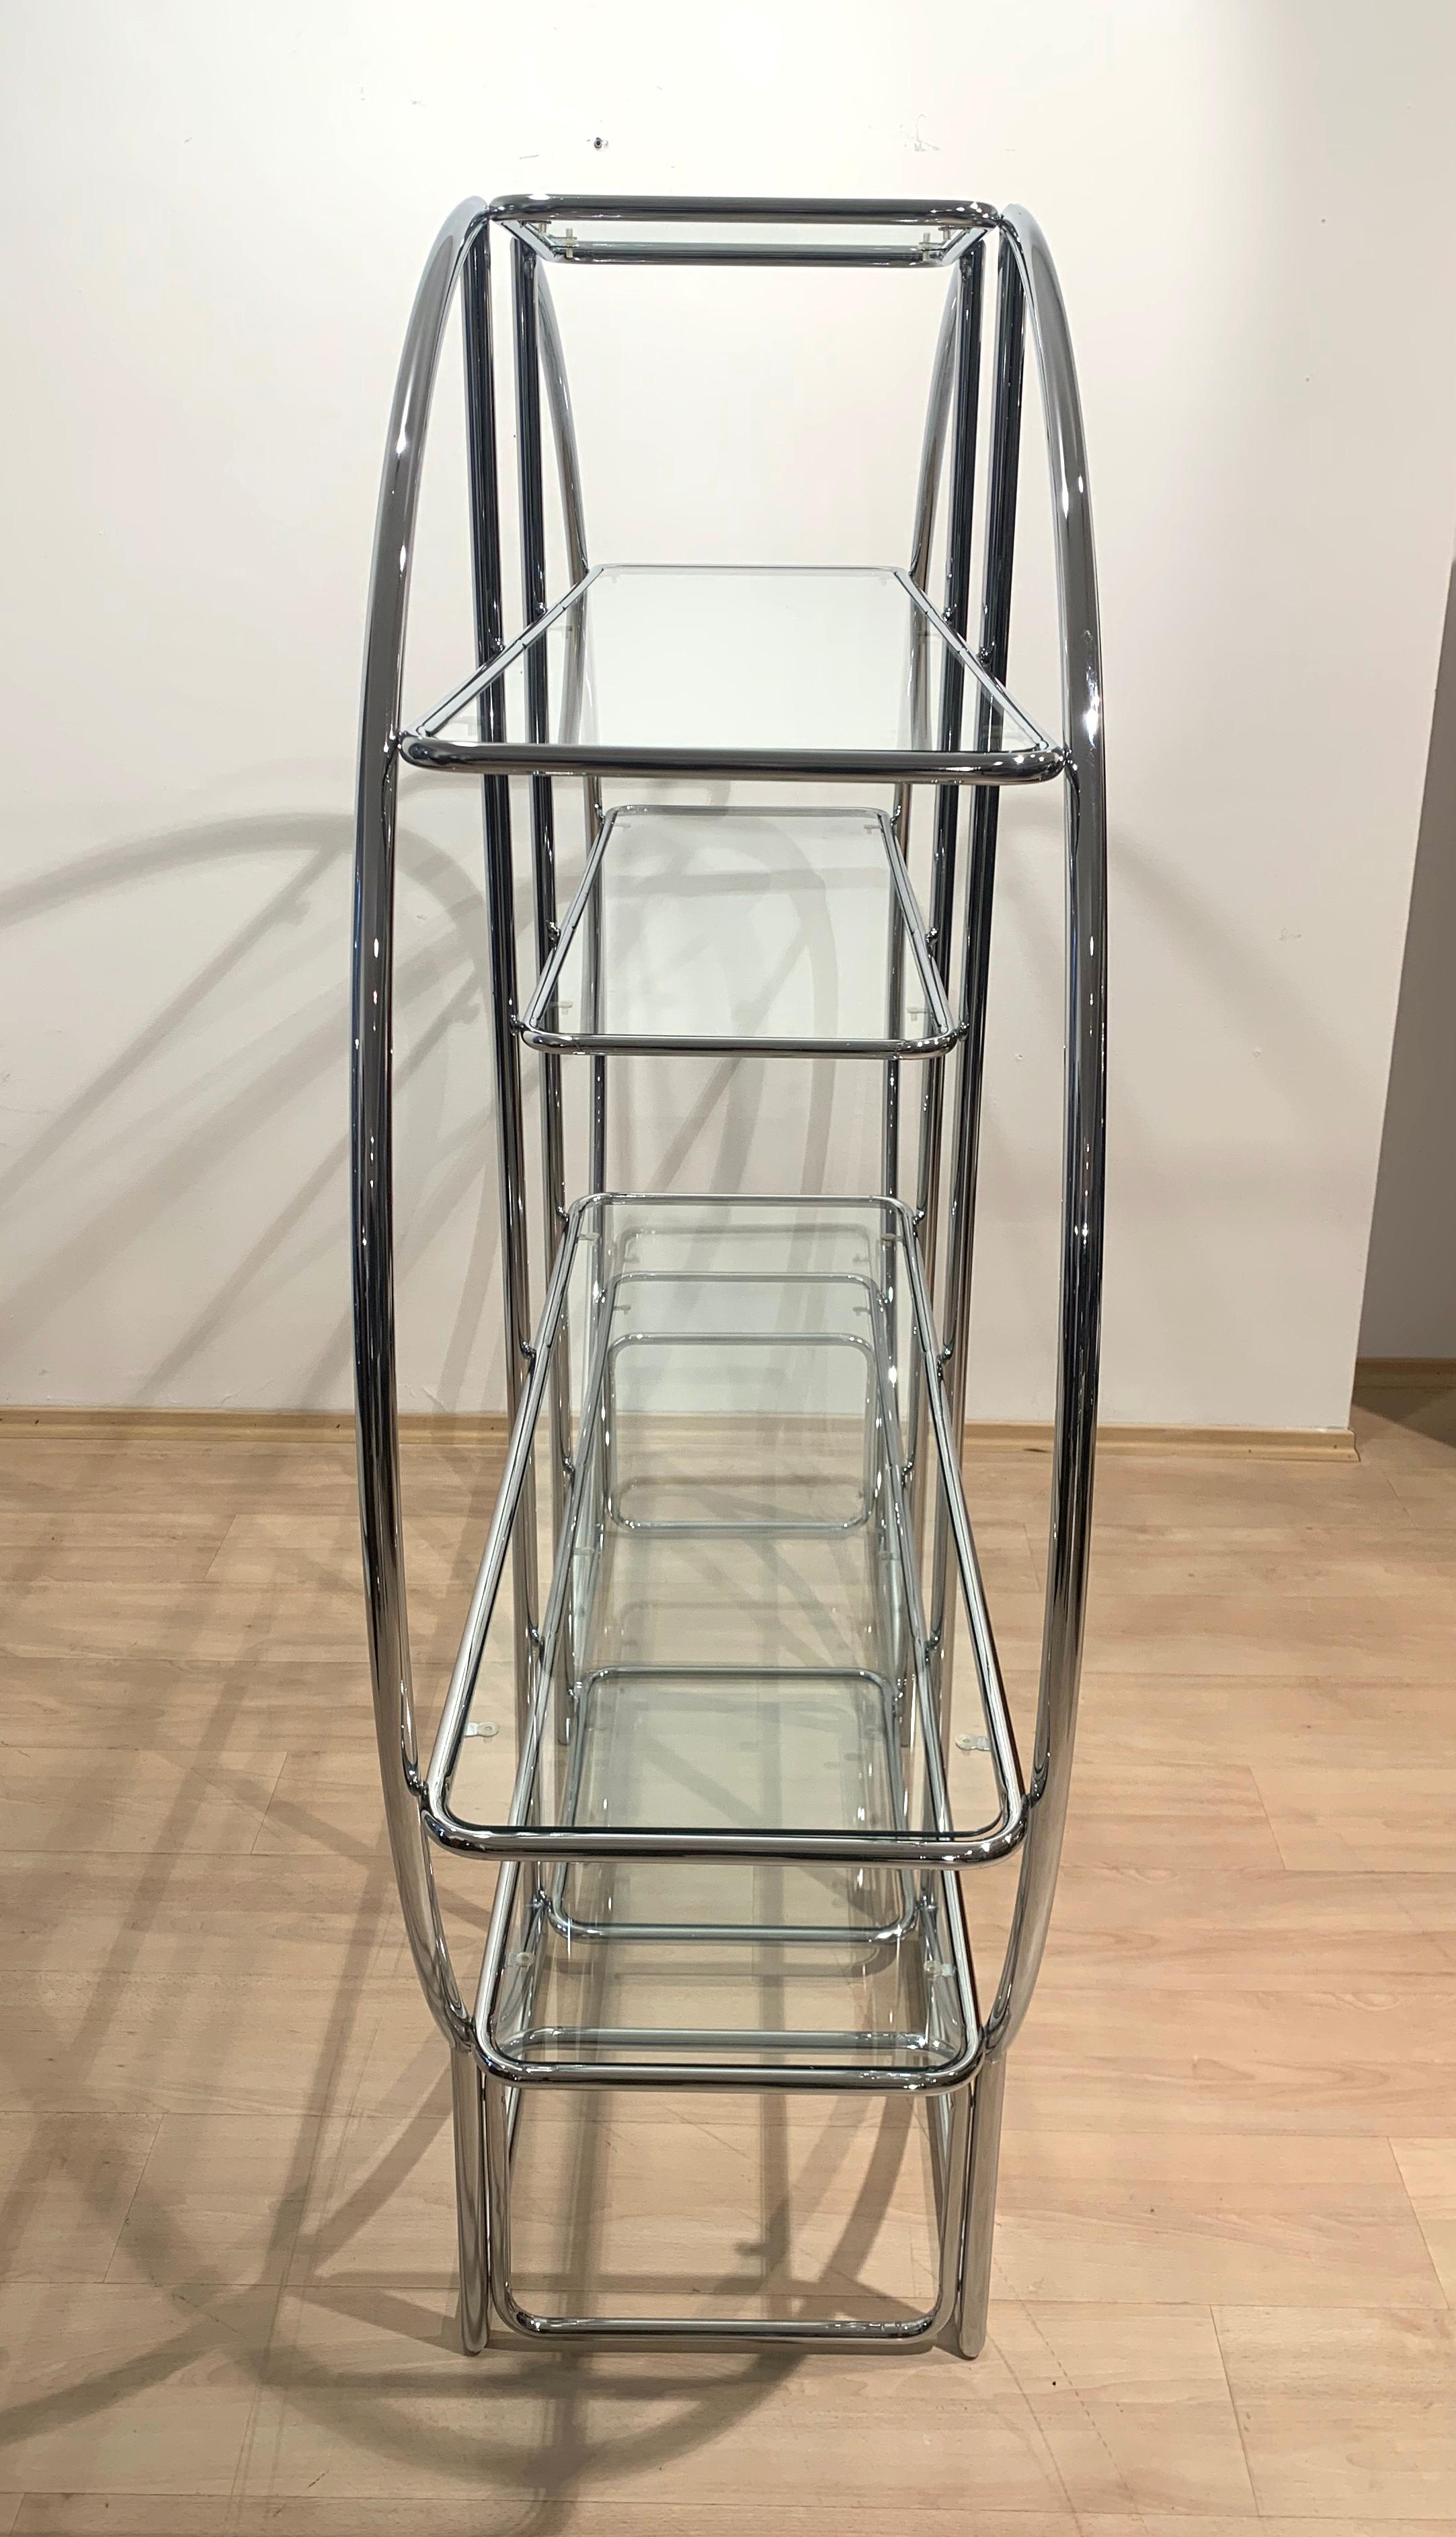 20th Century Bauhaus Style Shelf, Chromed Steeltubes and Glass, Germany, 1950-70s For Sale